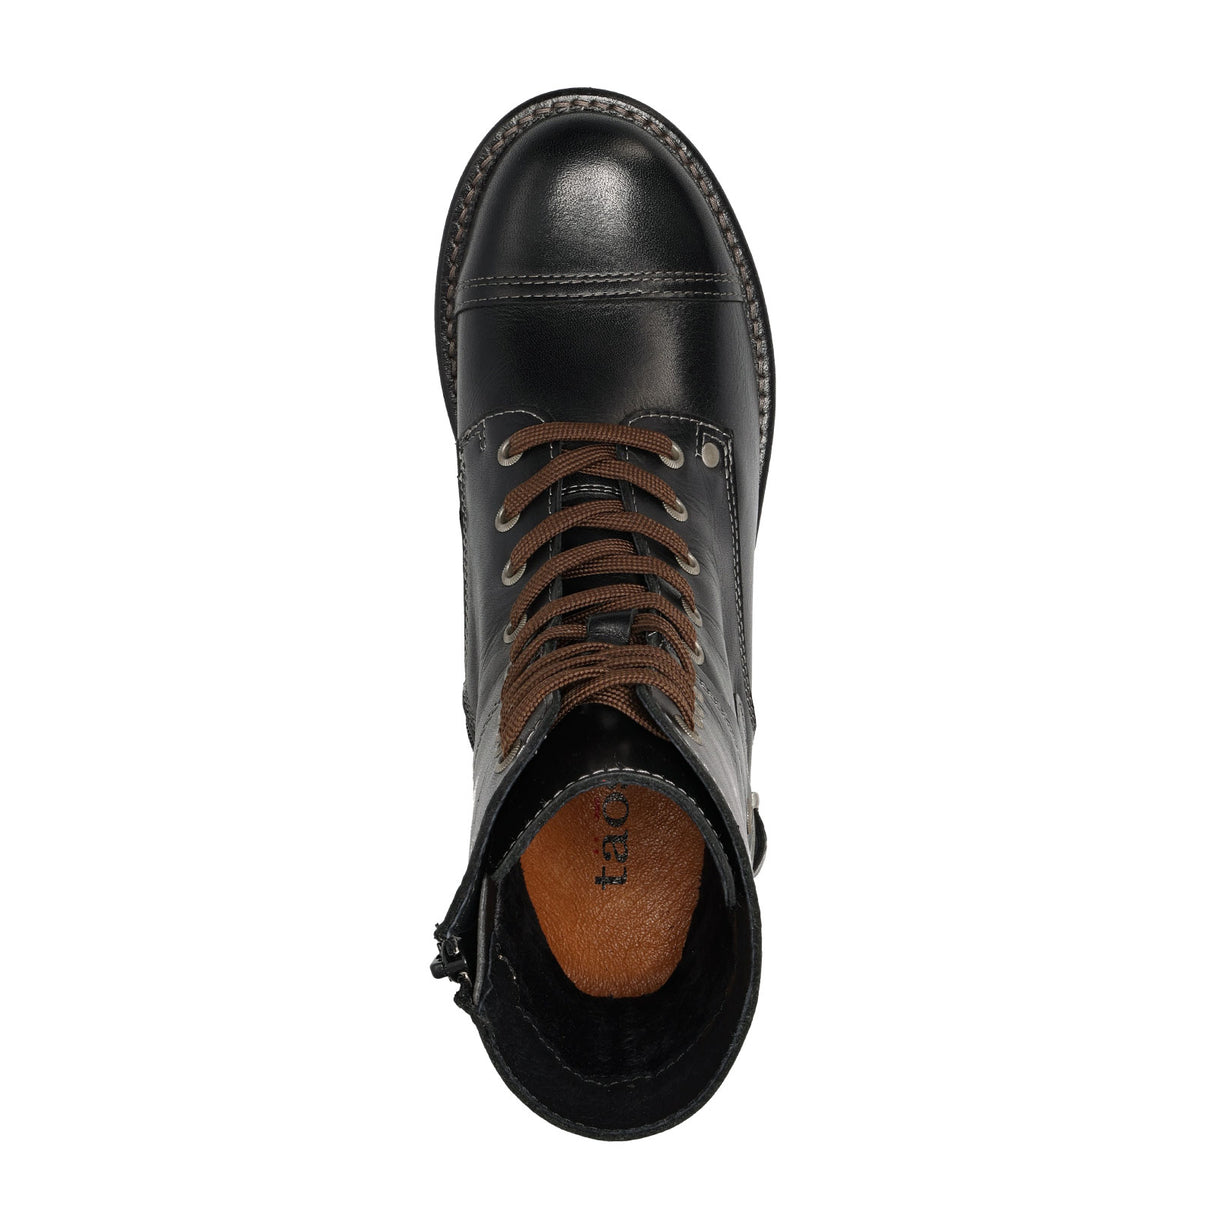 Taos Crave Lace Up Mid Boot (Women) - Classic Black Boots - Casual - Mid - The Heel Shoe Fitters